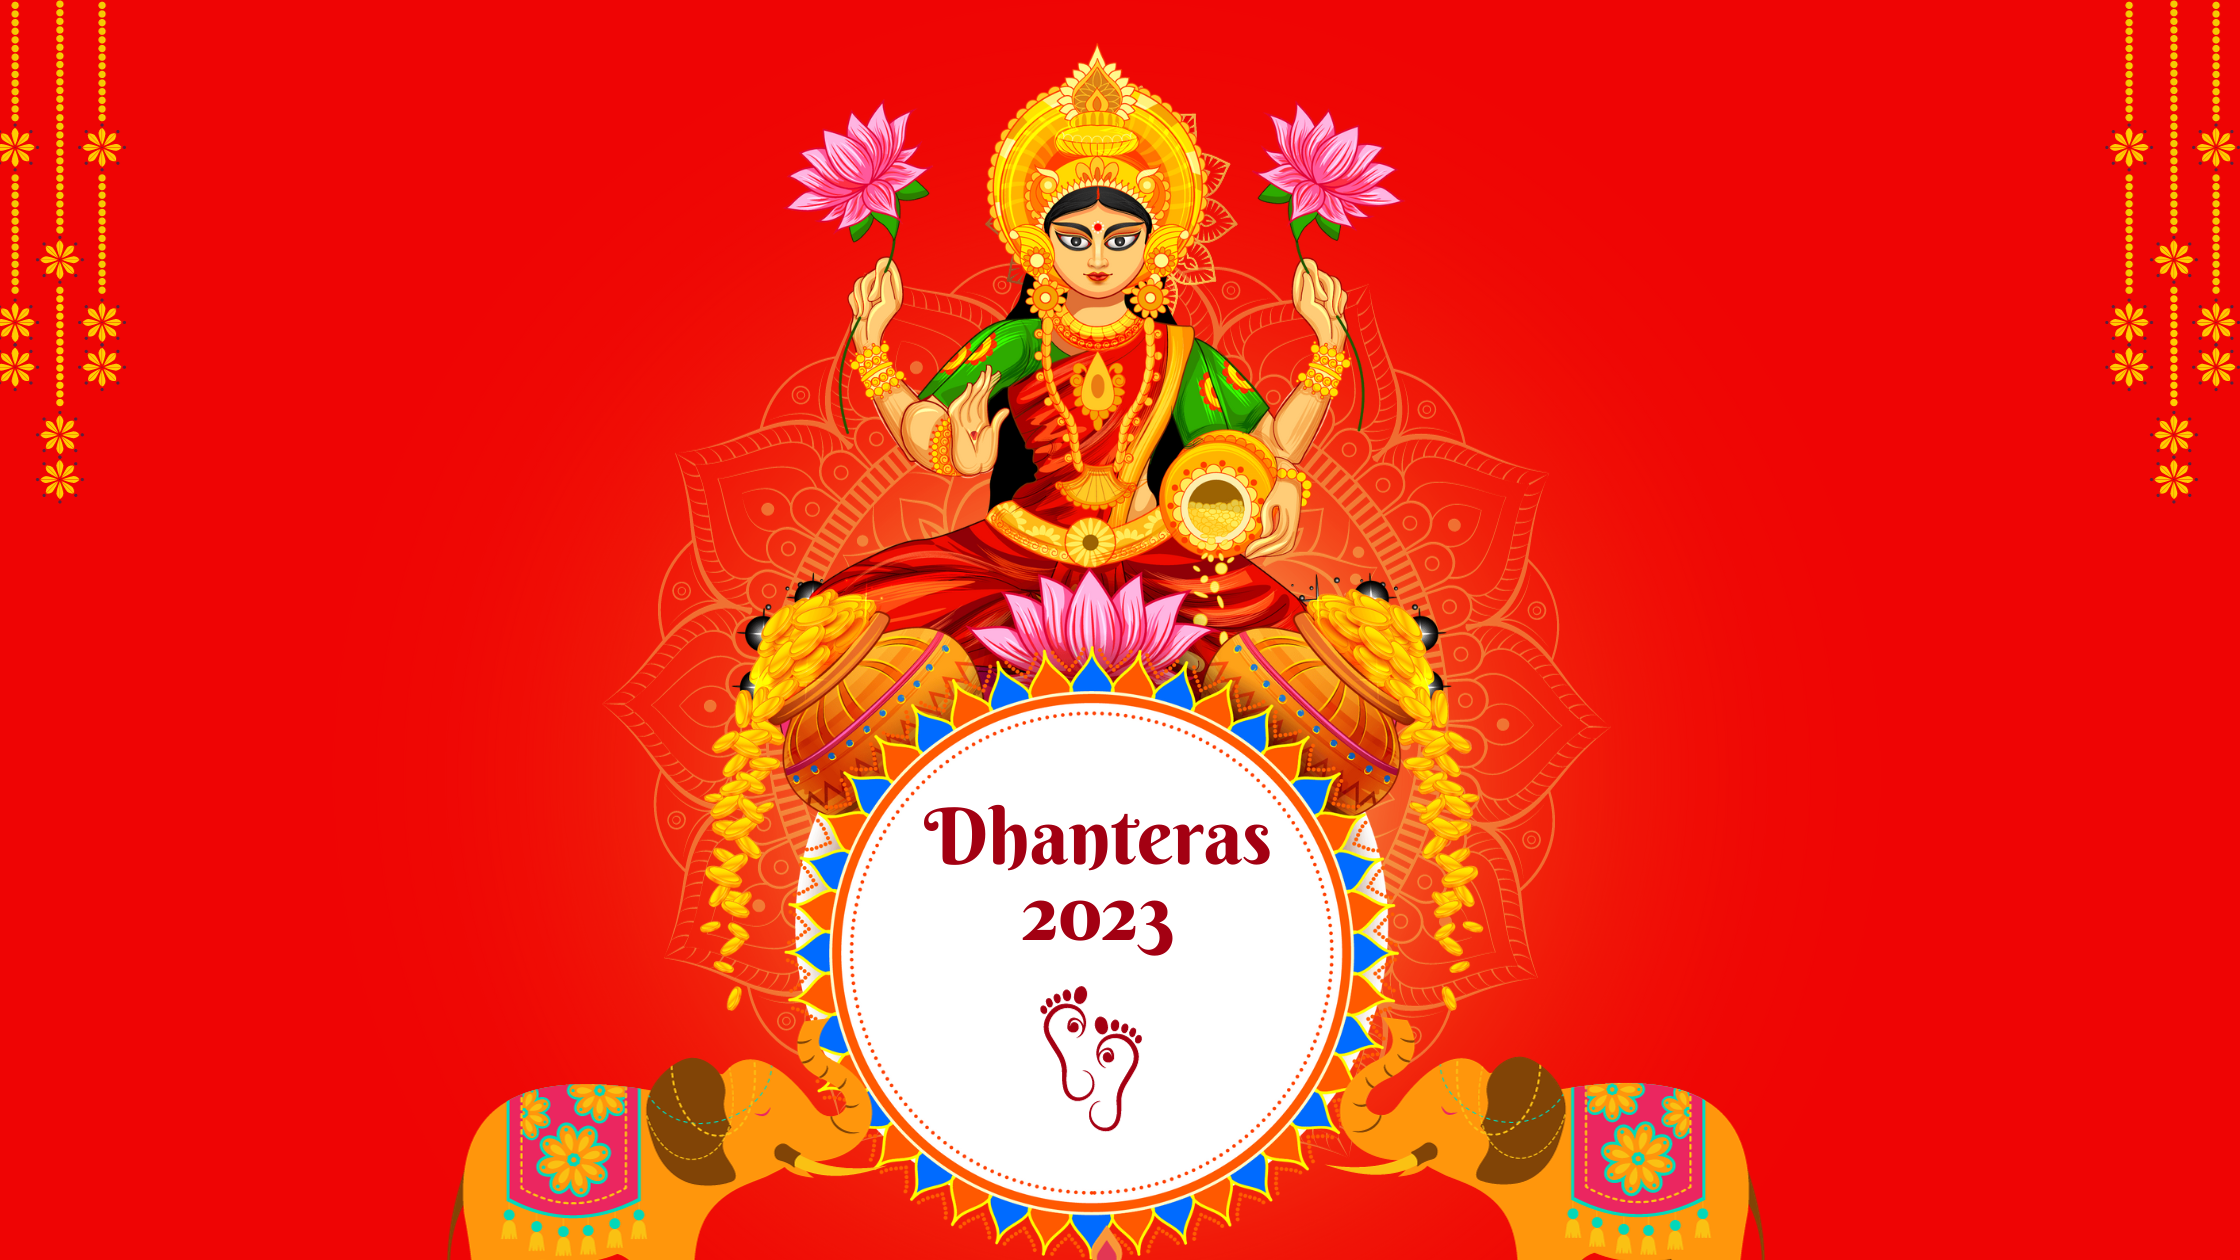 Dhanteras 2023- Know it's Date, Significance, Shubh Muhurat